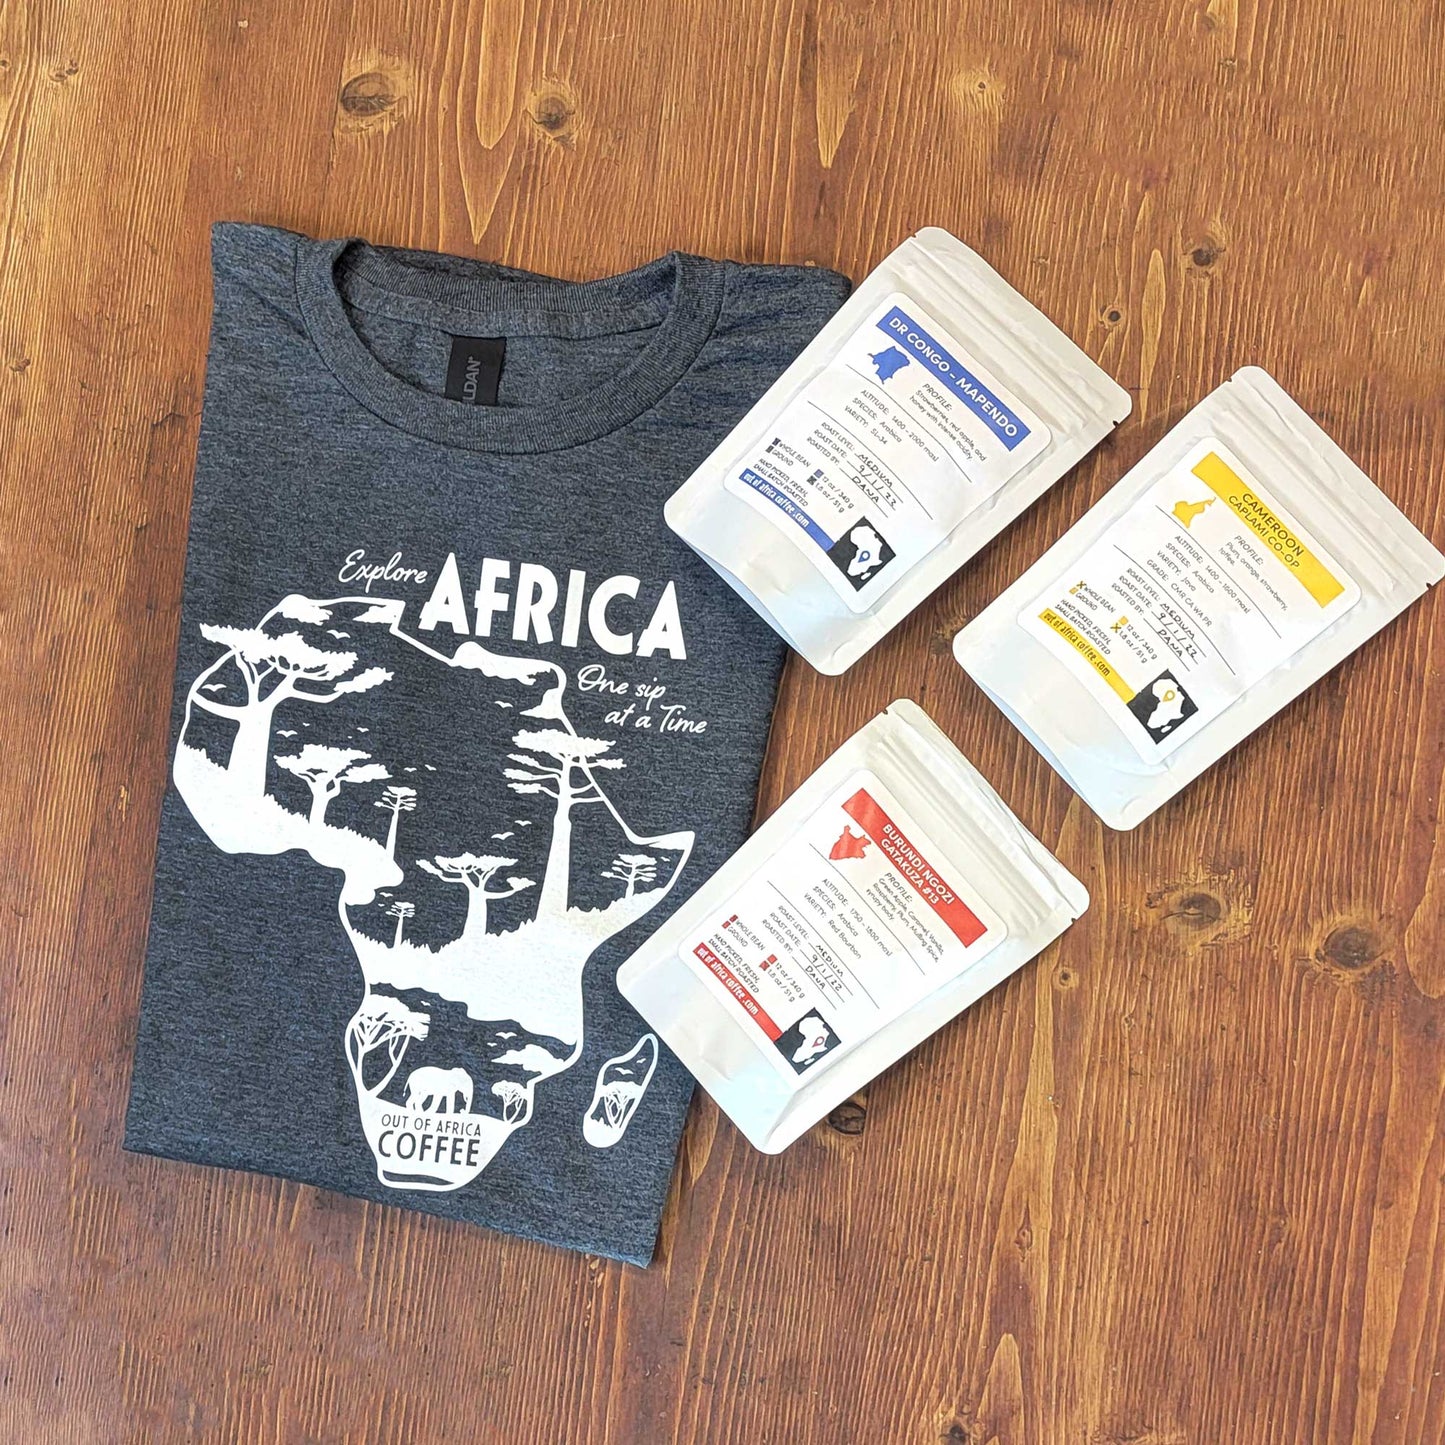 Out of Africa Collection: Explore Africa Ultra Soft T-Shirt